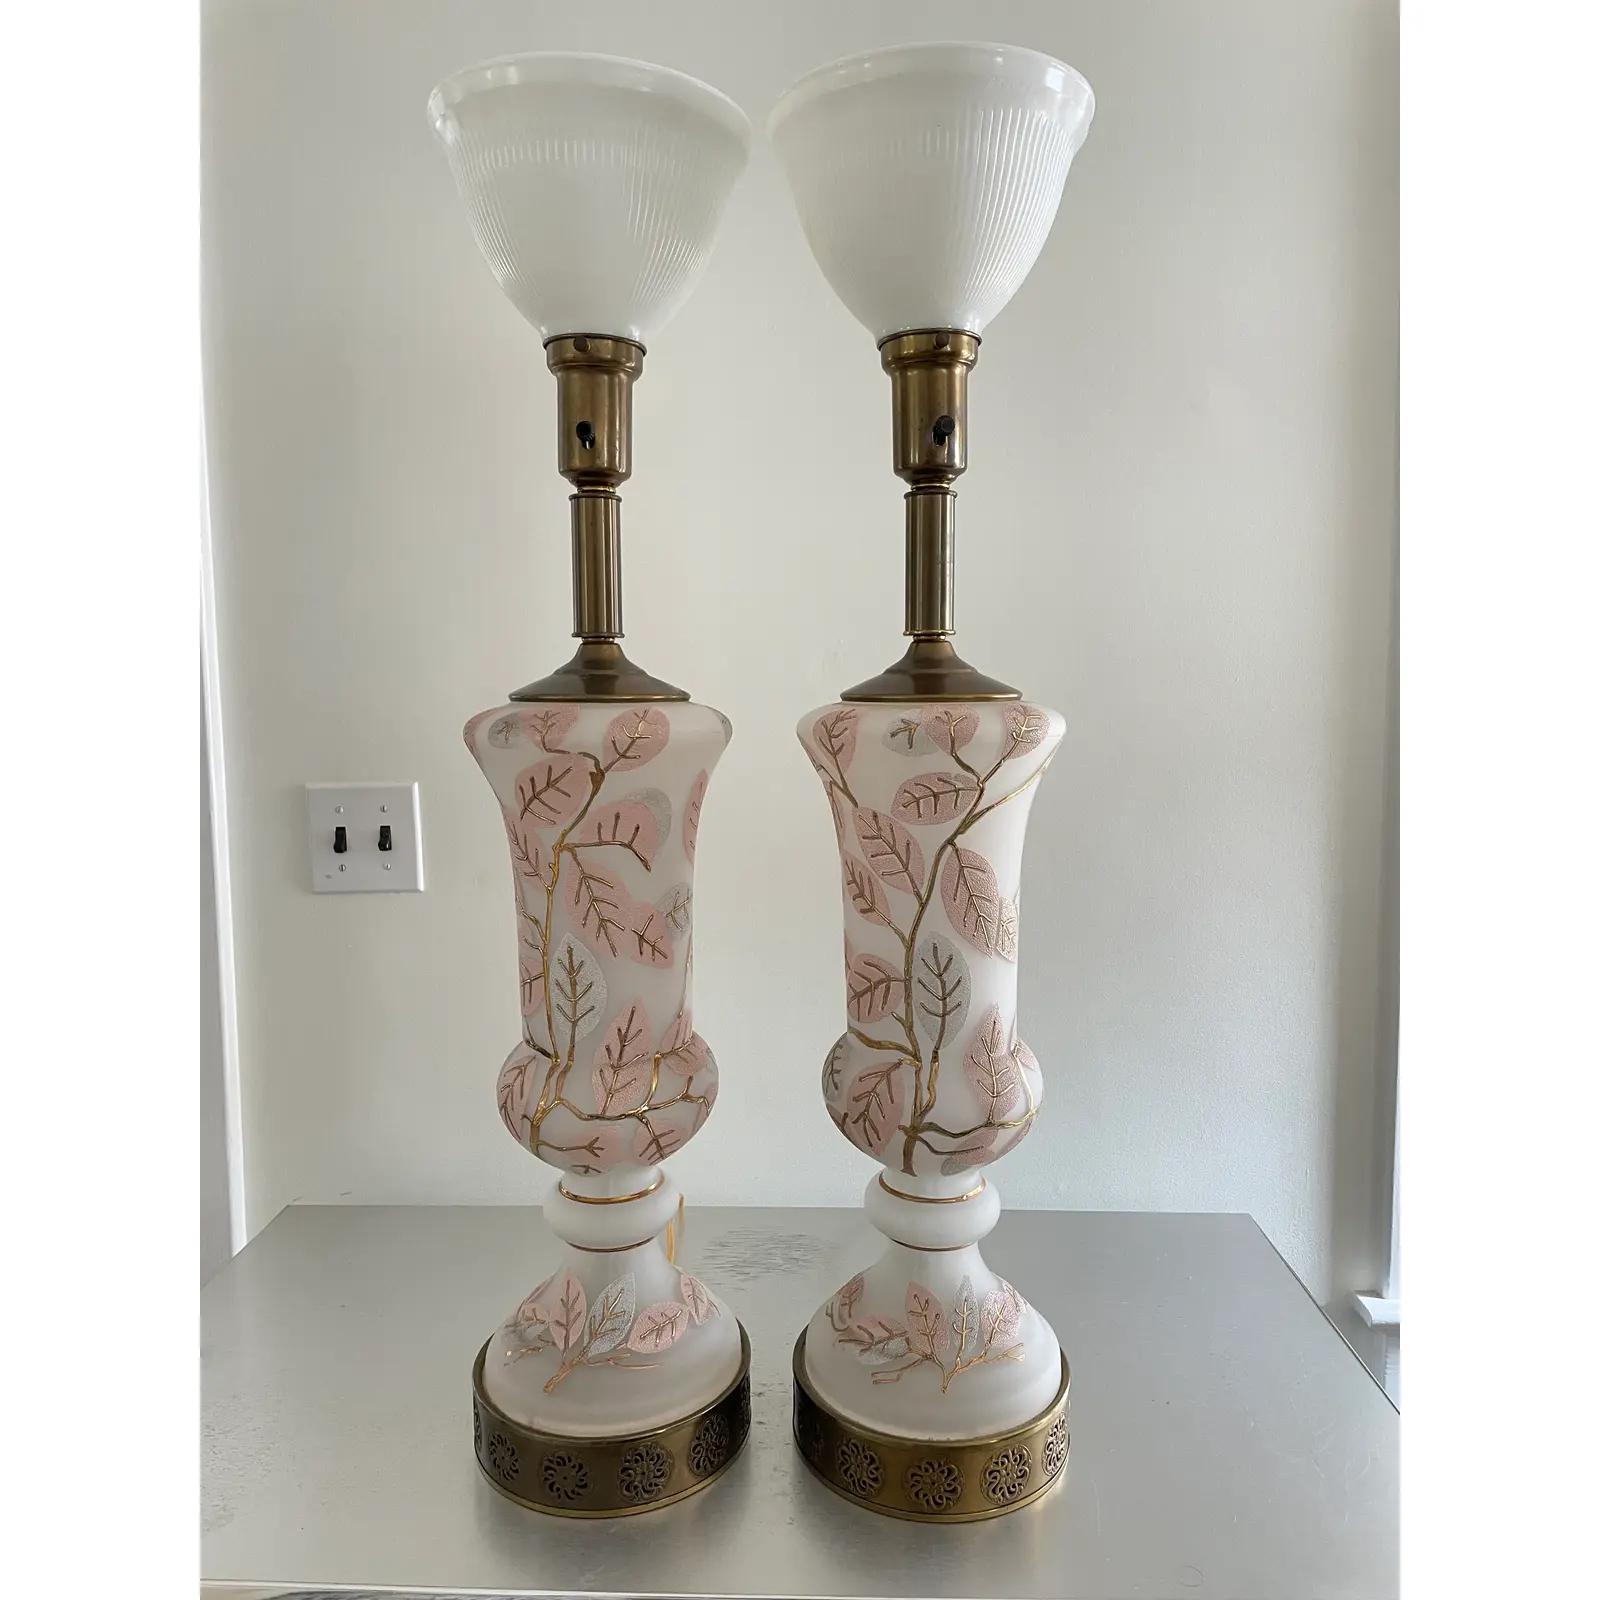 20th Century  Hollywood Regency Urn Lamps - a Pair